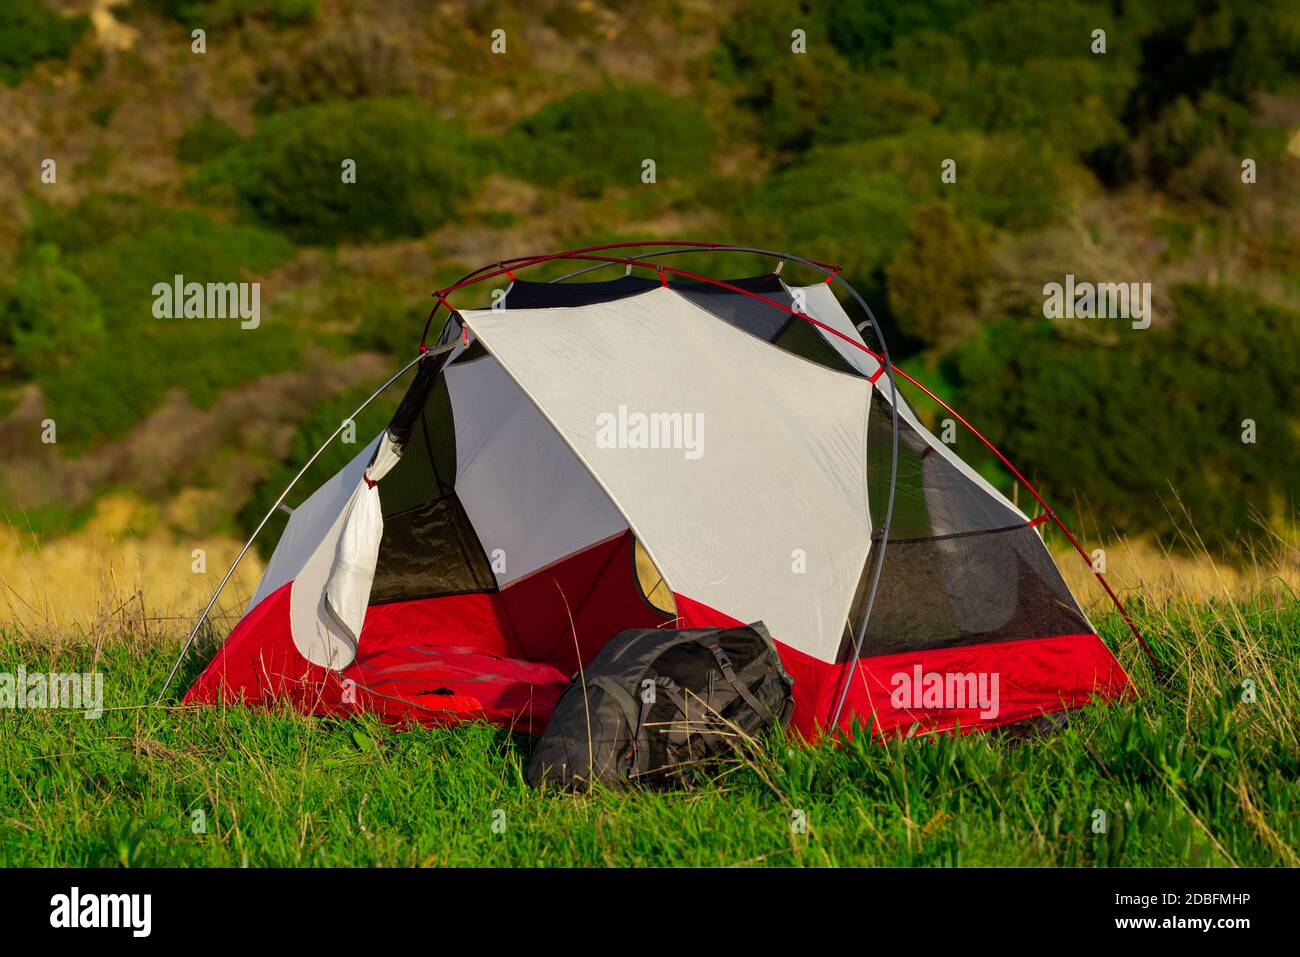 Tent for lightweight trekking for 2 people. Camping and backpacking tent with 2 doors. Easy setup tent. Stock Photo